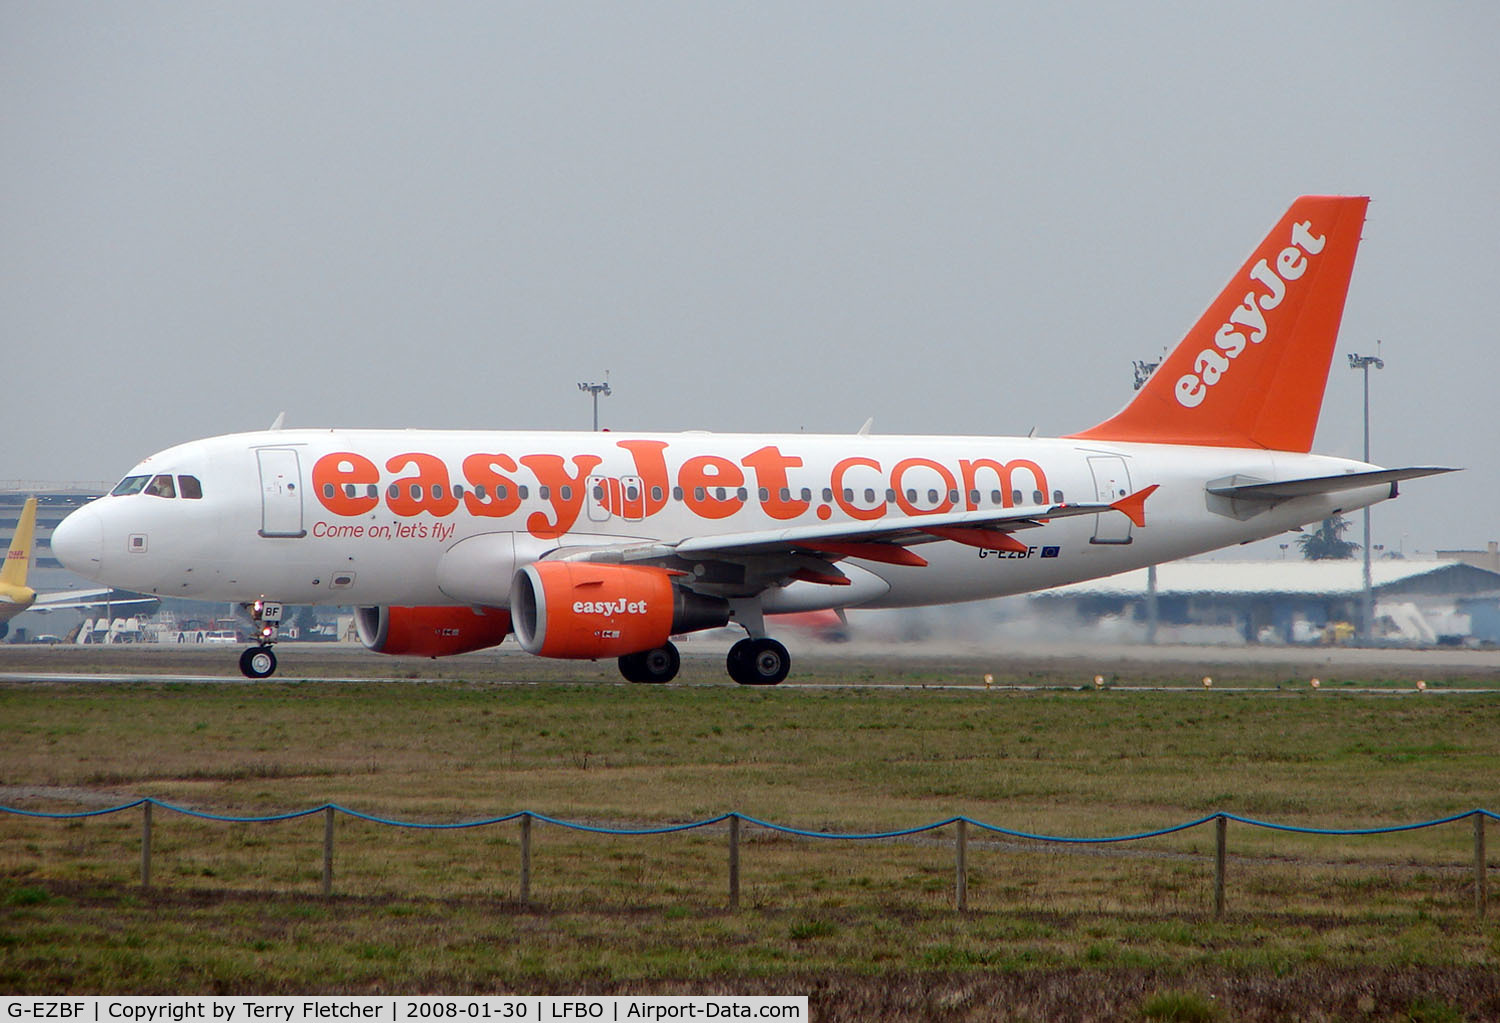 G-EZBF, 2006 Airbus A319-111 C/N 2923, Easyjet A319 arrives at Toulouse